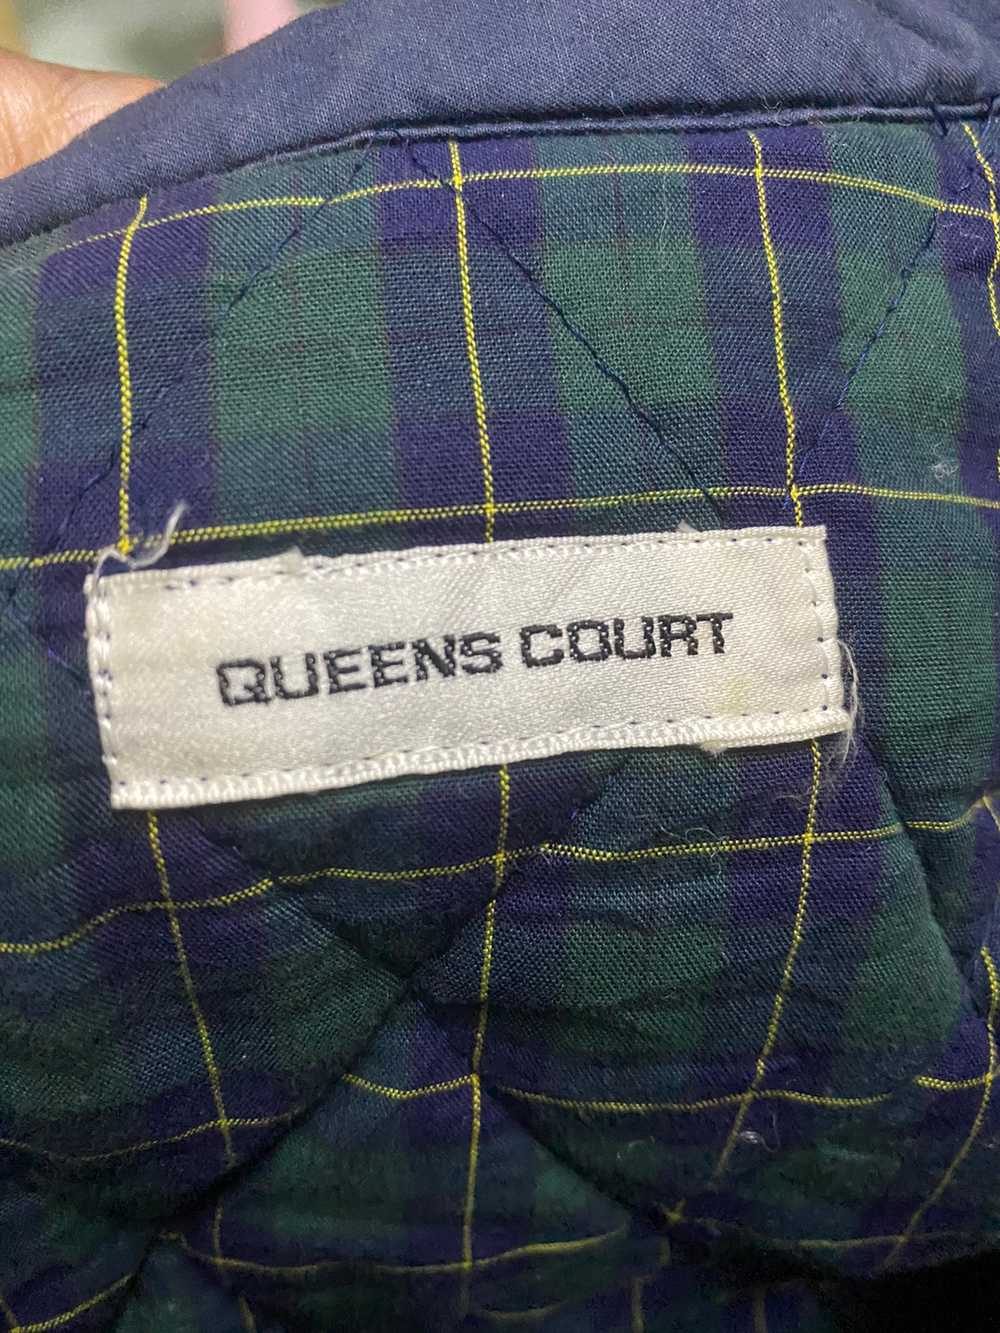 Japanese Brand - Queens Court Bomber Jacket - image 3